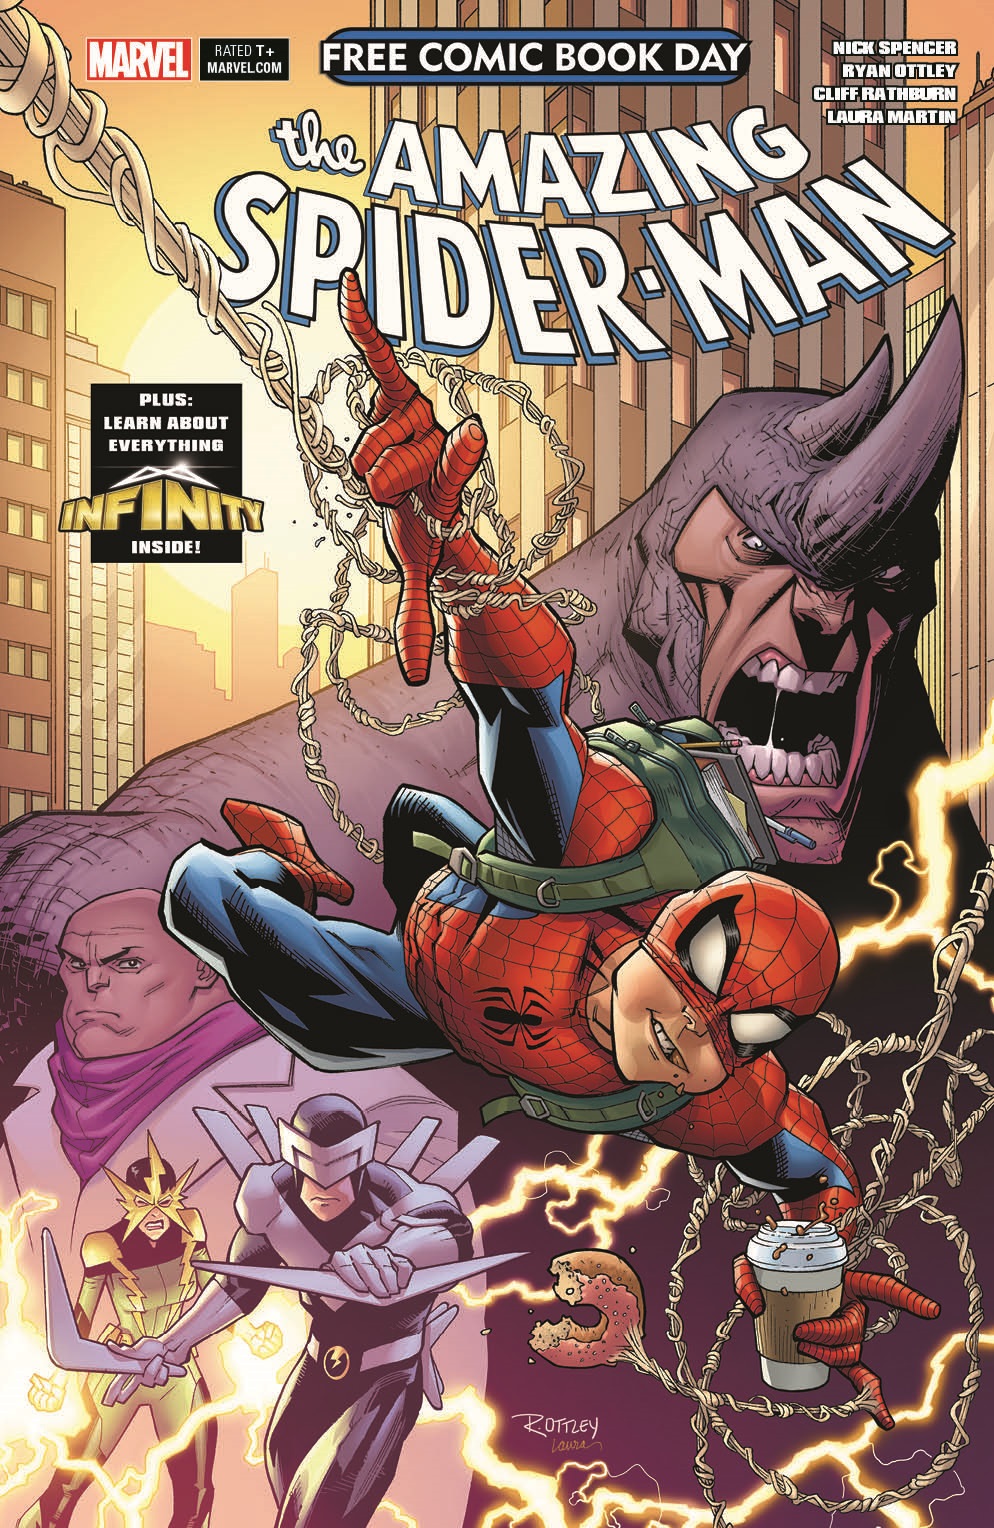 Marvel Releases Cover for Amazing SpiderMan’s Free Comic Book Day 2018